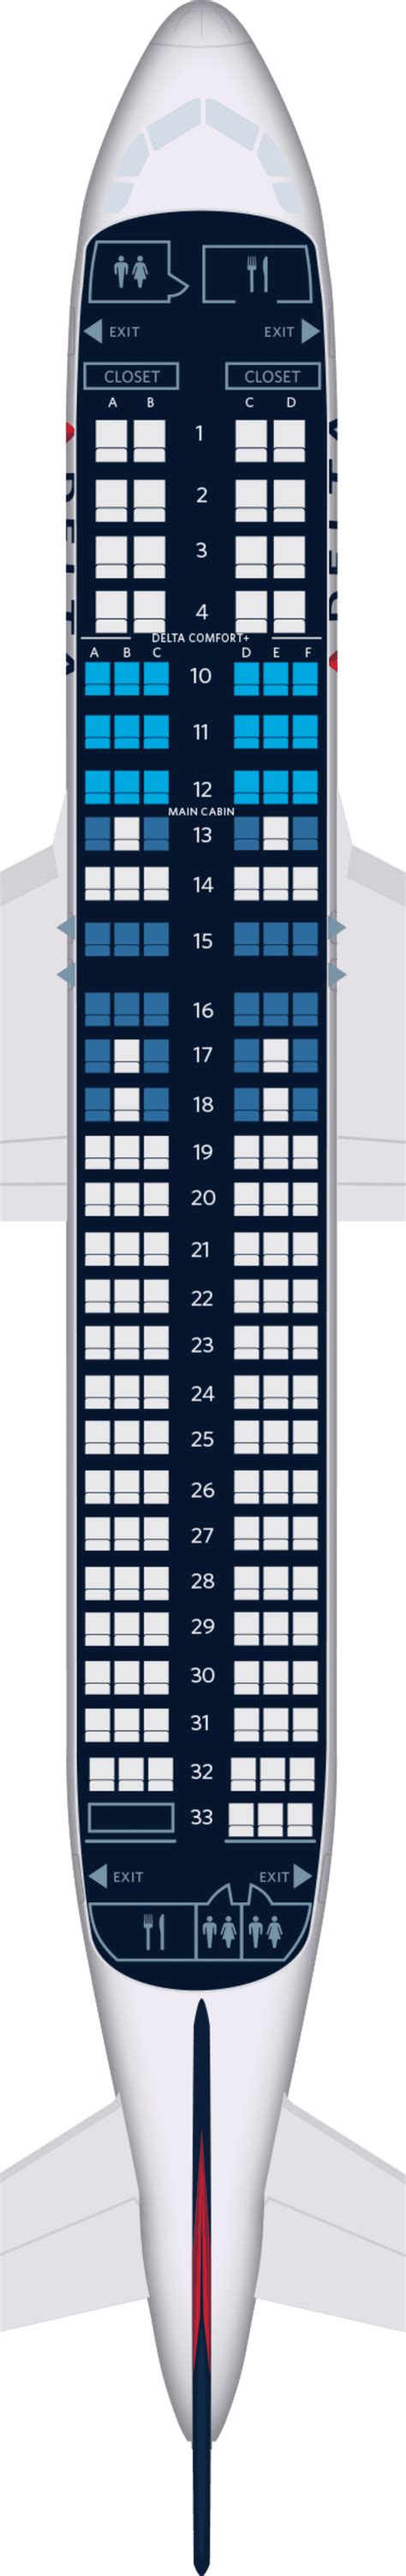 Airbus A320 Seat Map Map Worksheets